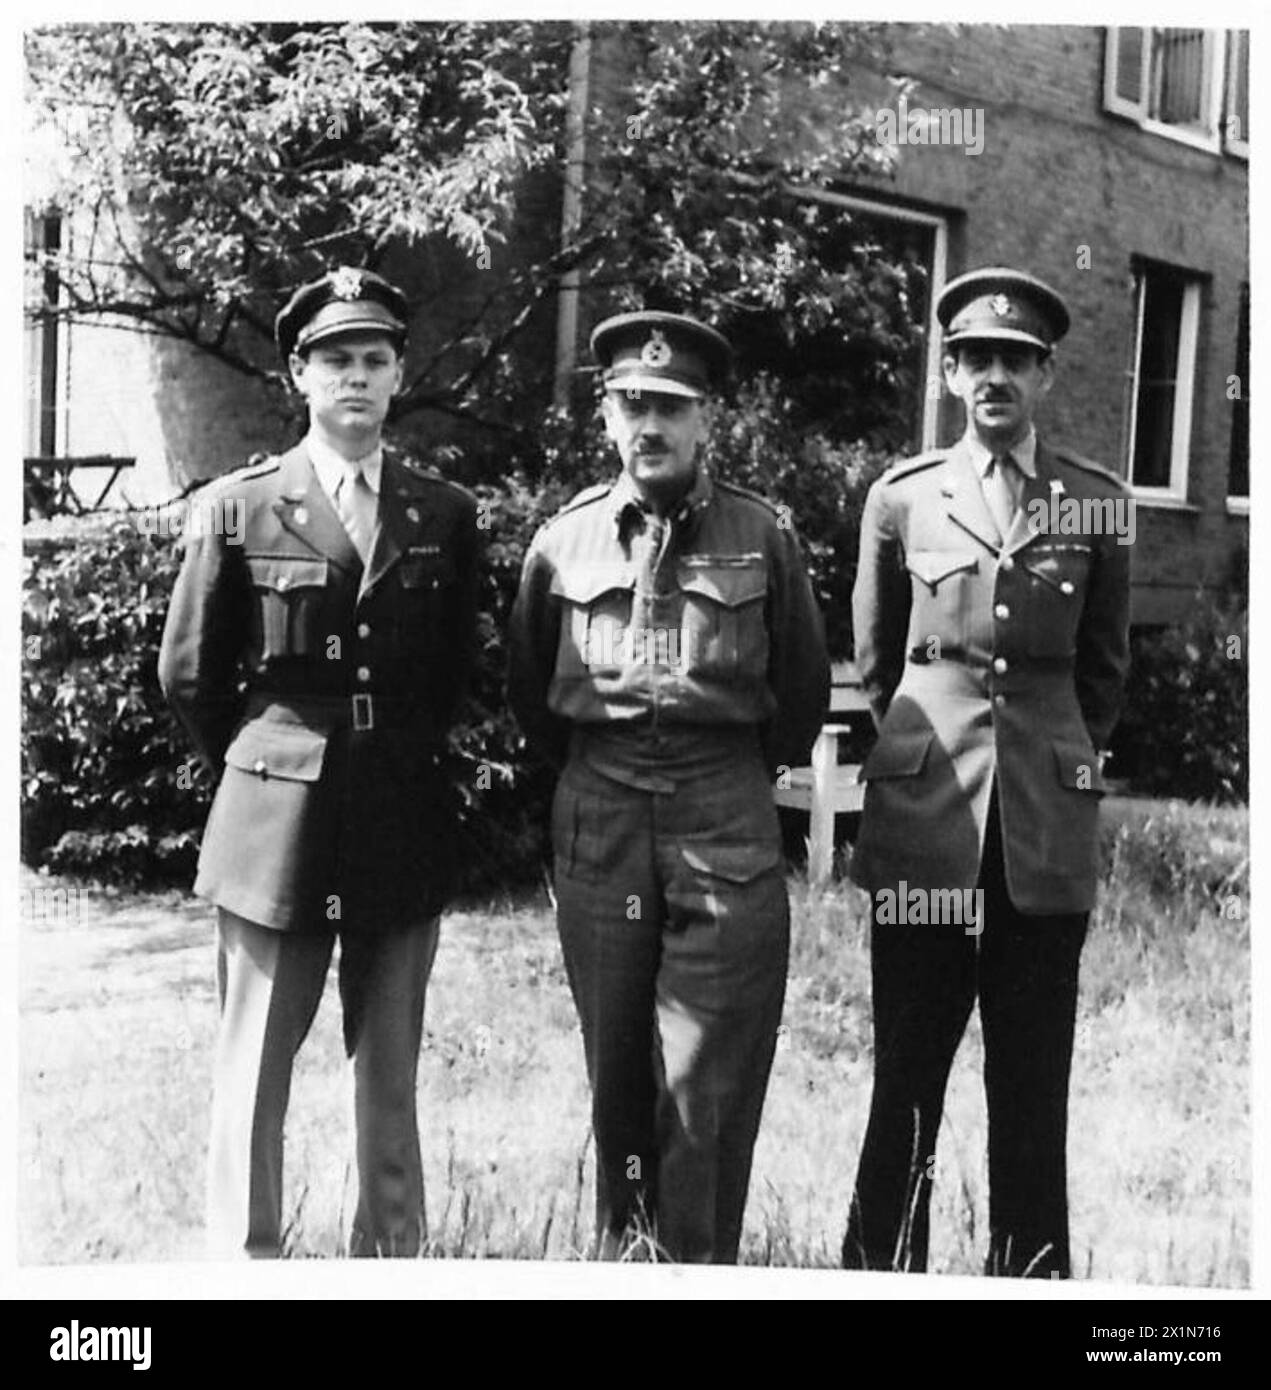 PICTURES OF MAJOR GENERAL SIR F.W. DE GUINGAND, KBE.,CB.,DSO., CHIEF OF STAFF TO 21 ARMY GROUP - The Chief of Staff with his A.D.C. and P.A. Left to right - Major E.R. Culvert, A.D.C. Major General Sir F.W. de Guingand, and Major W.F.Bovill, P.A, British Army, 21st Army Group Stock Photo